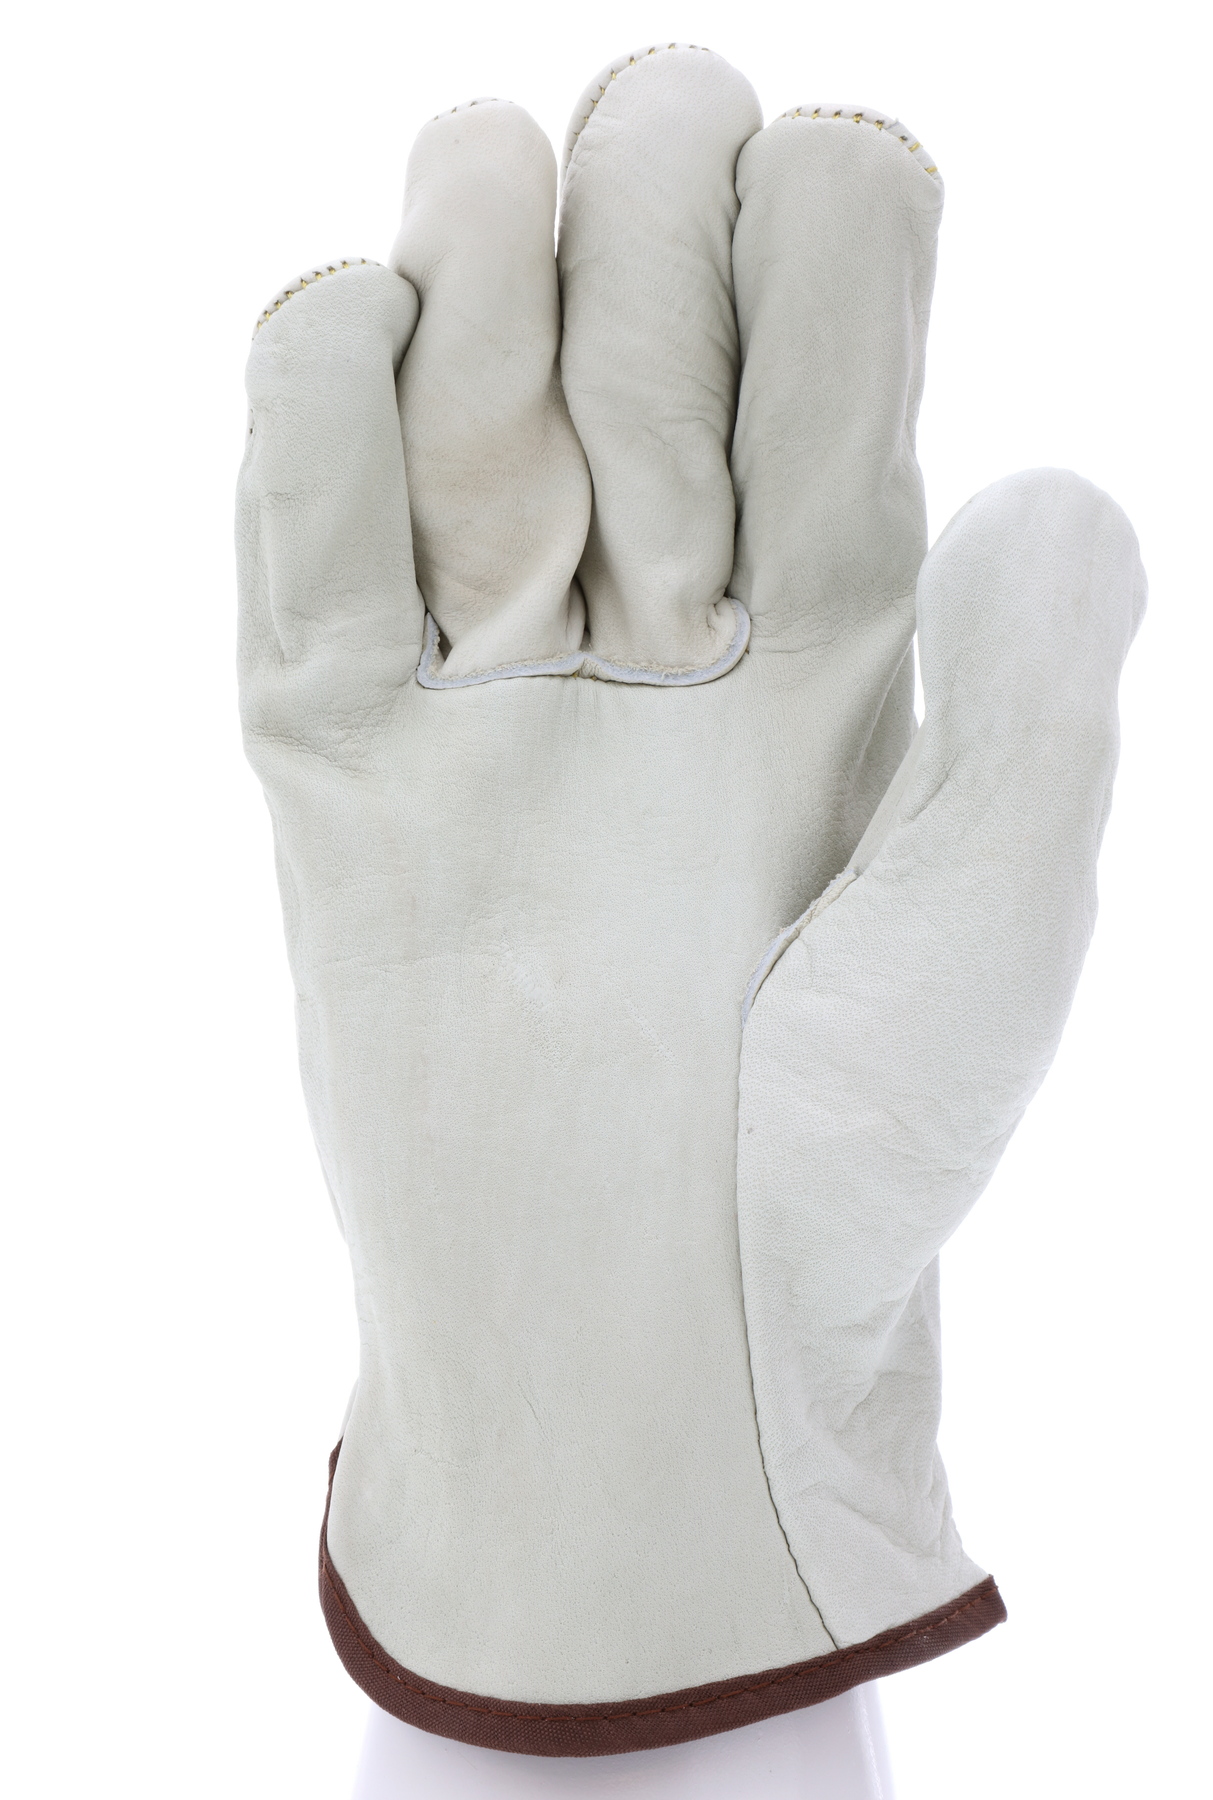 CV Grade Grain Unlined Cow Leather Drivers Gloves - Gloves